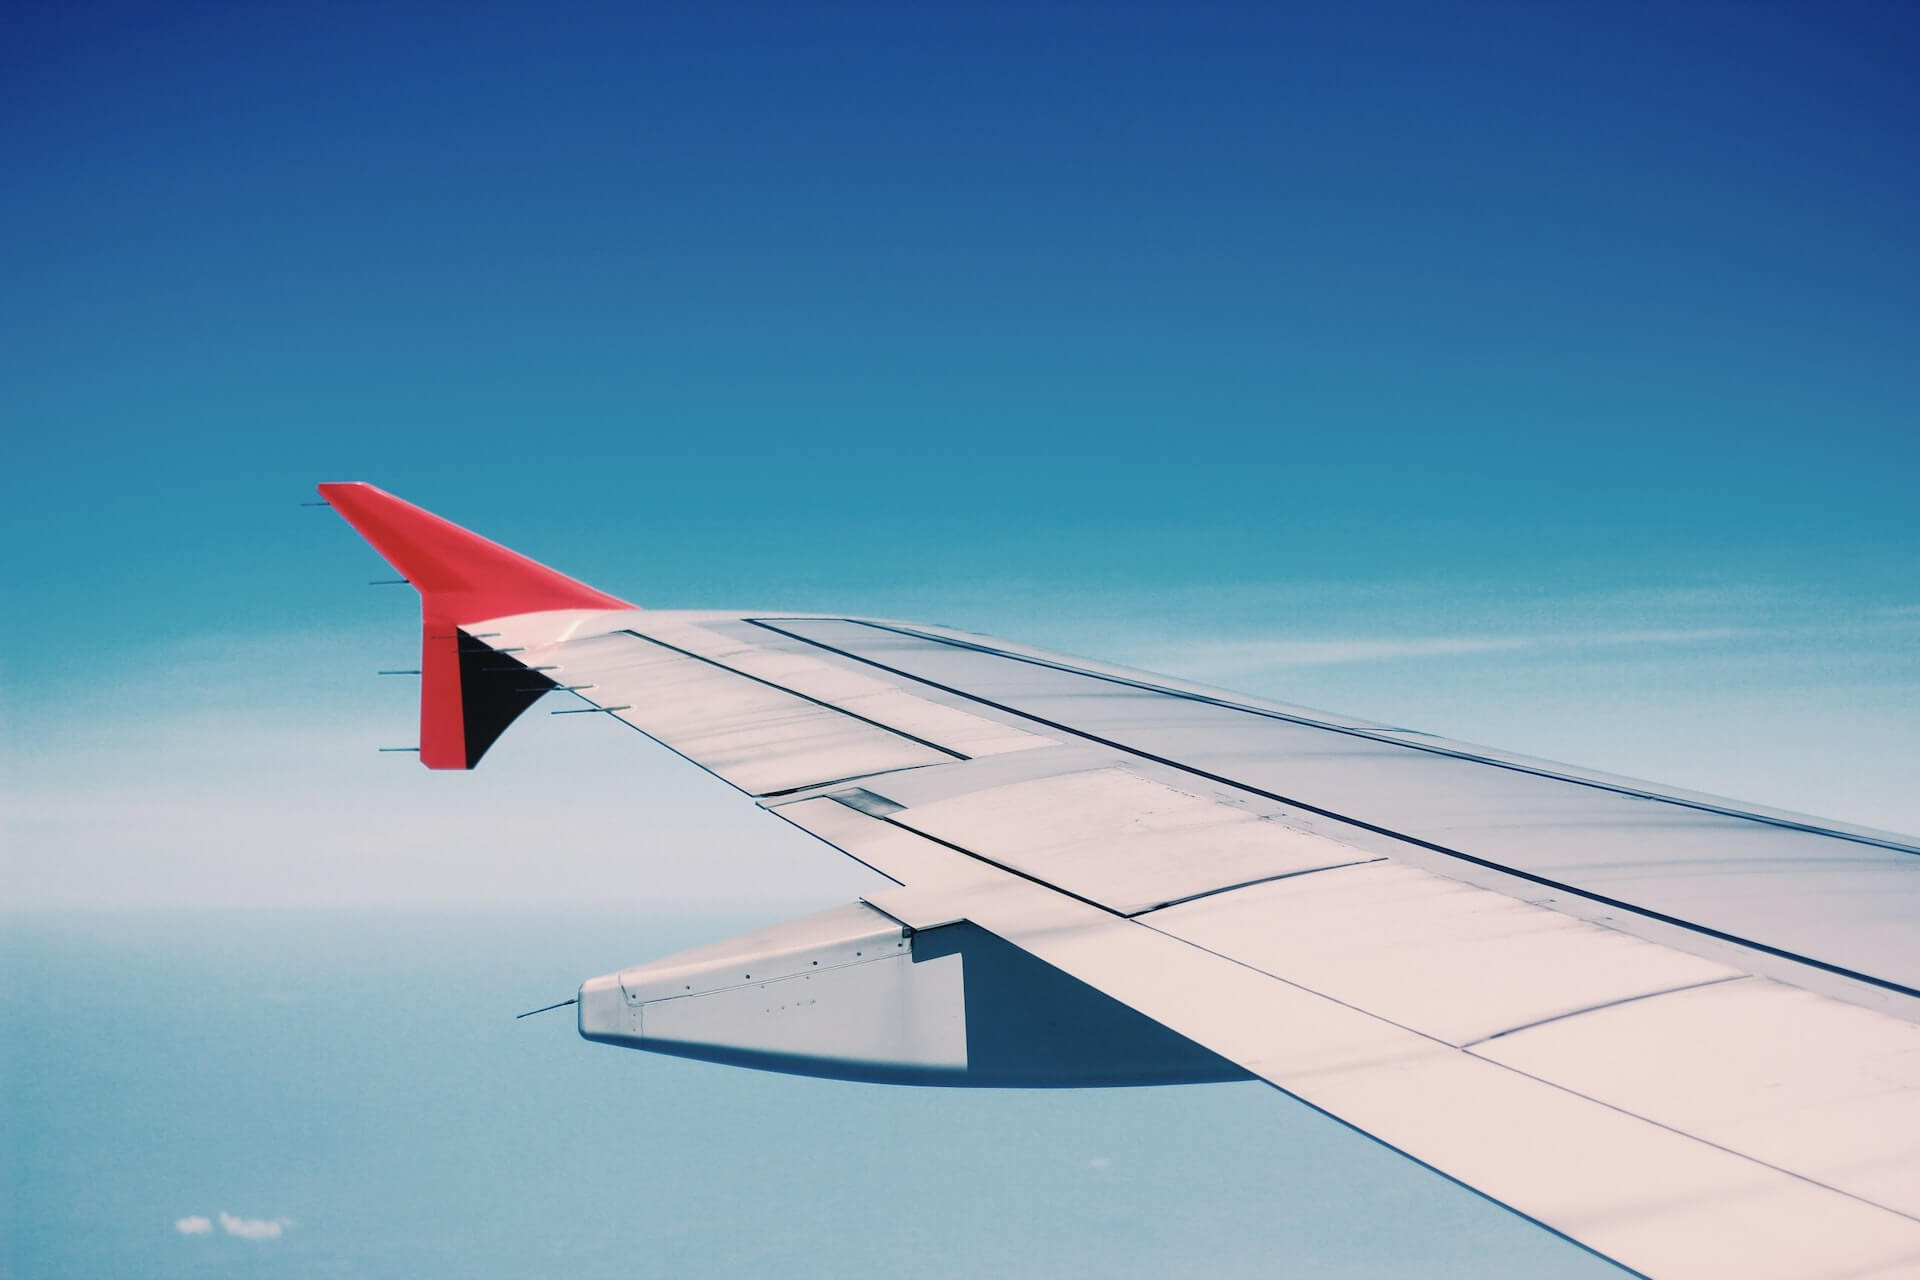 Airplane wing shown in flight